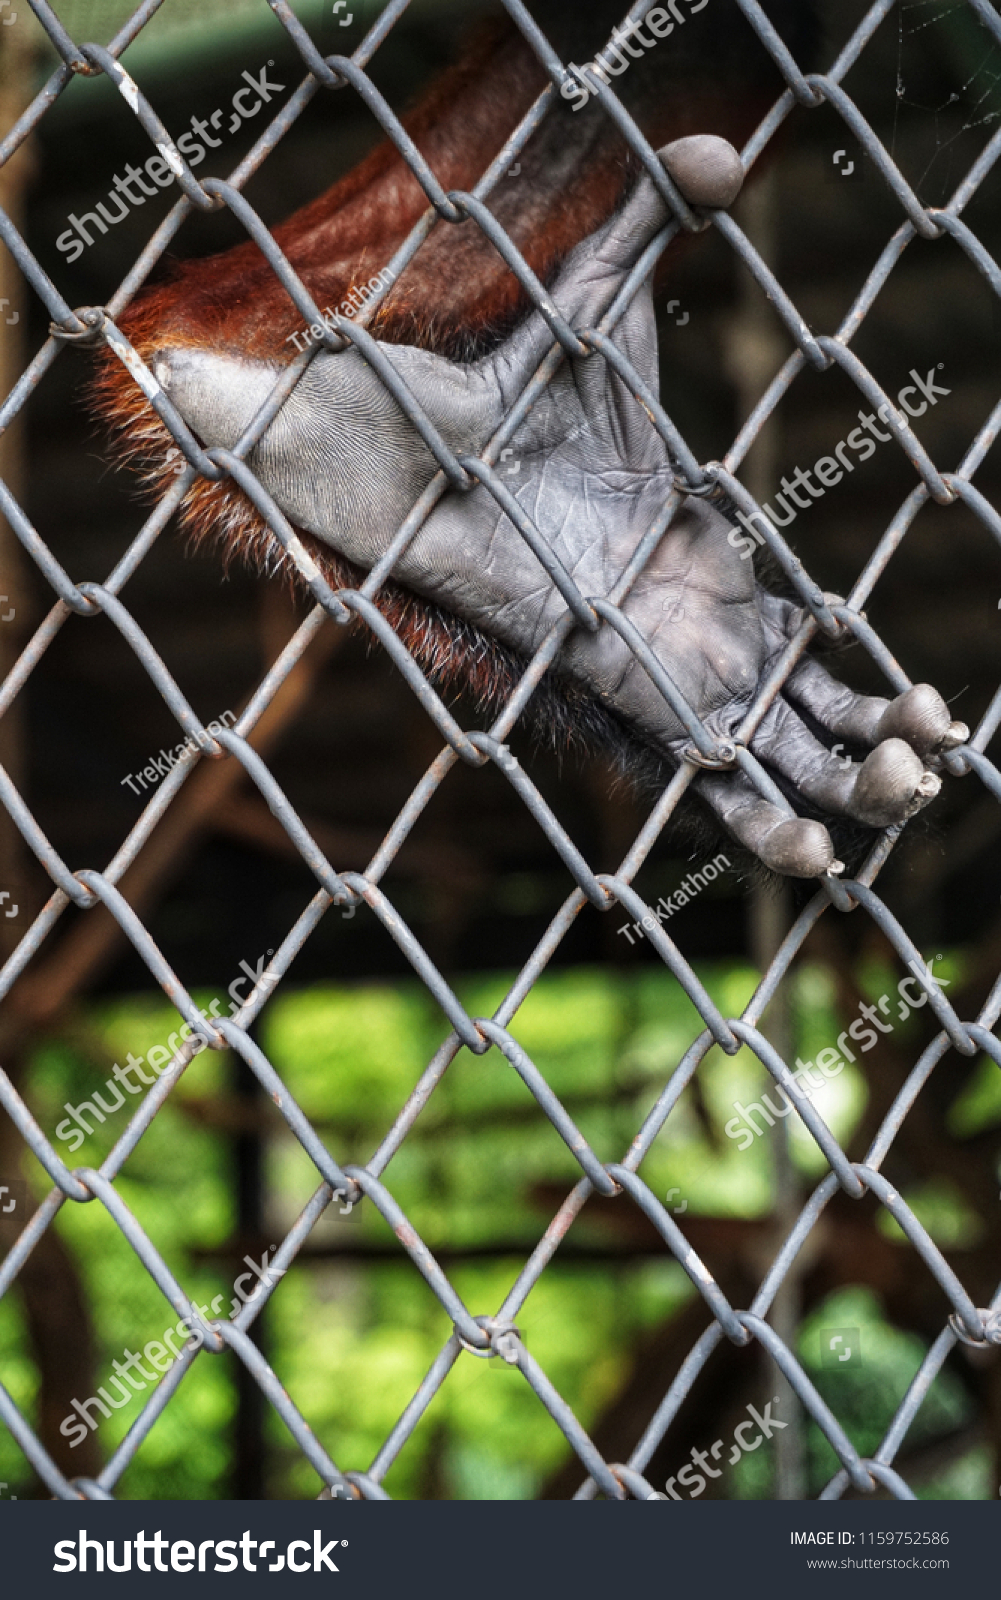 Foot of a red-shanked douc langur in the cage. It is a species of Old World monkey, among the most colourful of all primates. It is sometimes called the "costumed ape" for its extravagant appearance. #1159752586